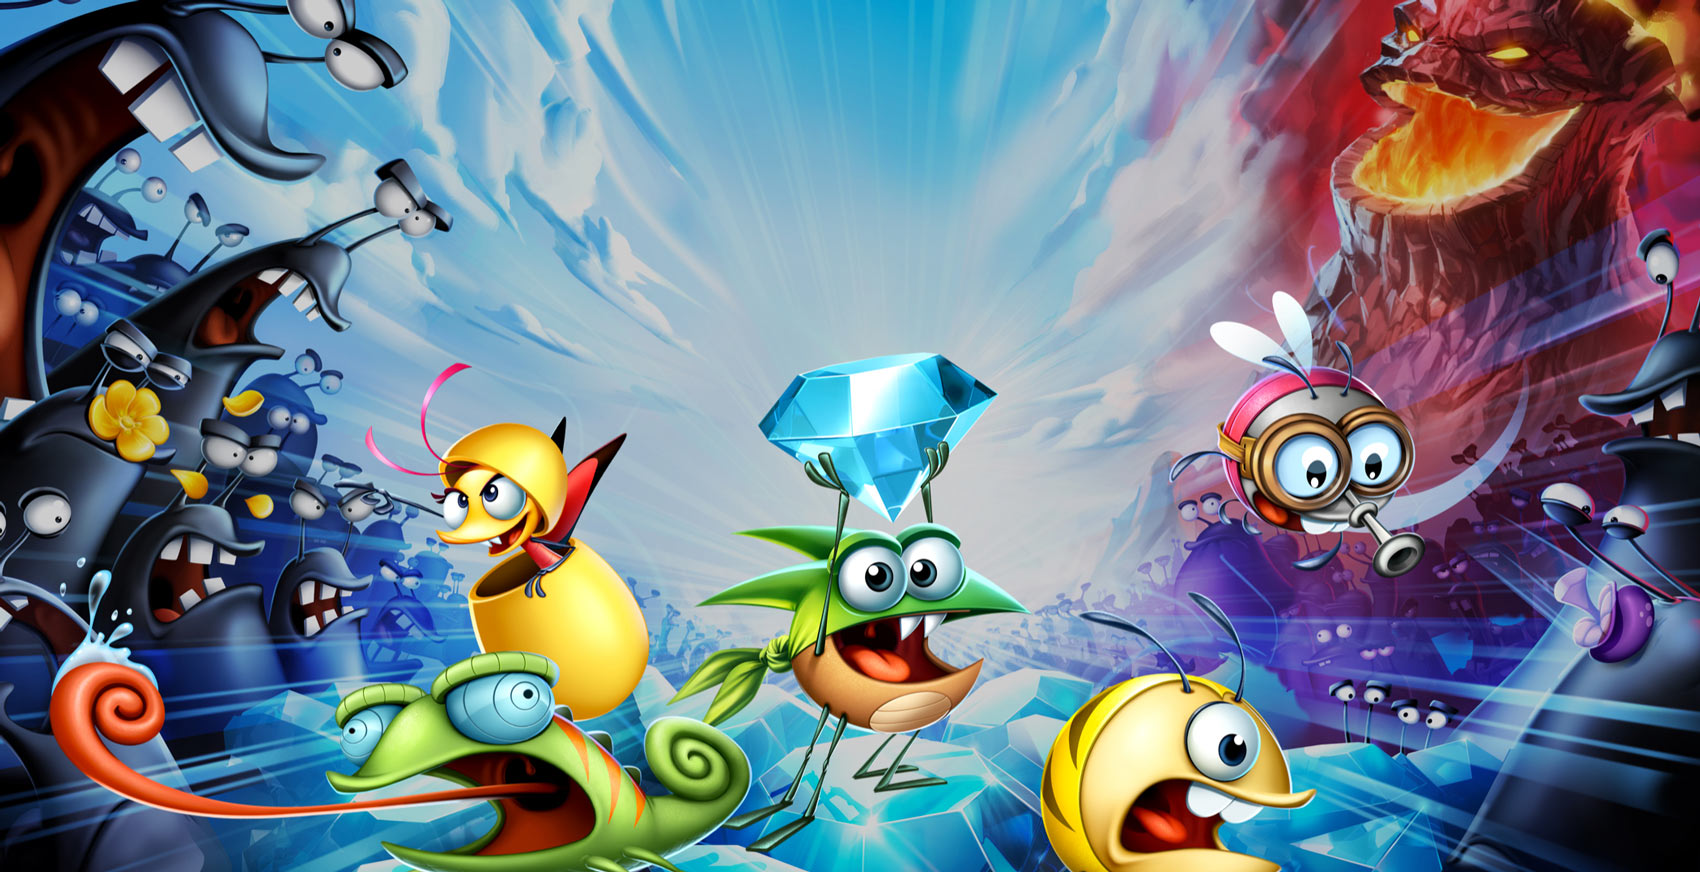 best fiends game free download for pc